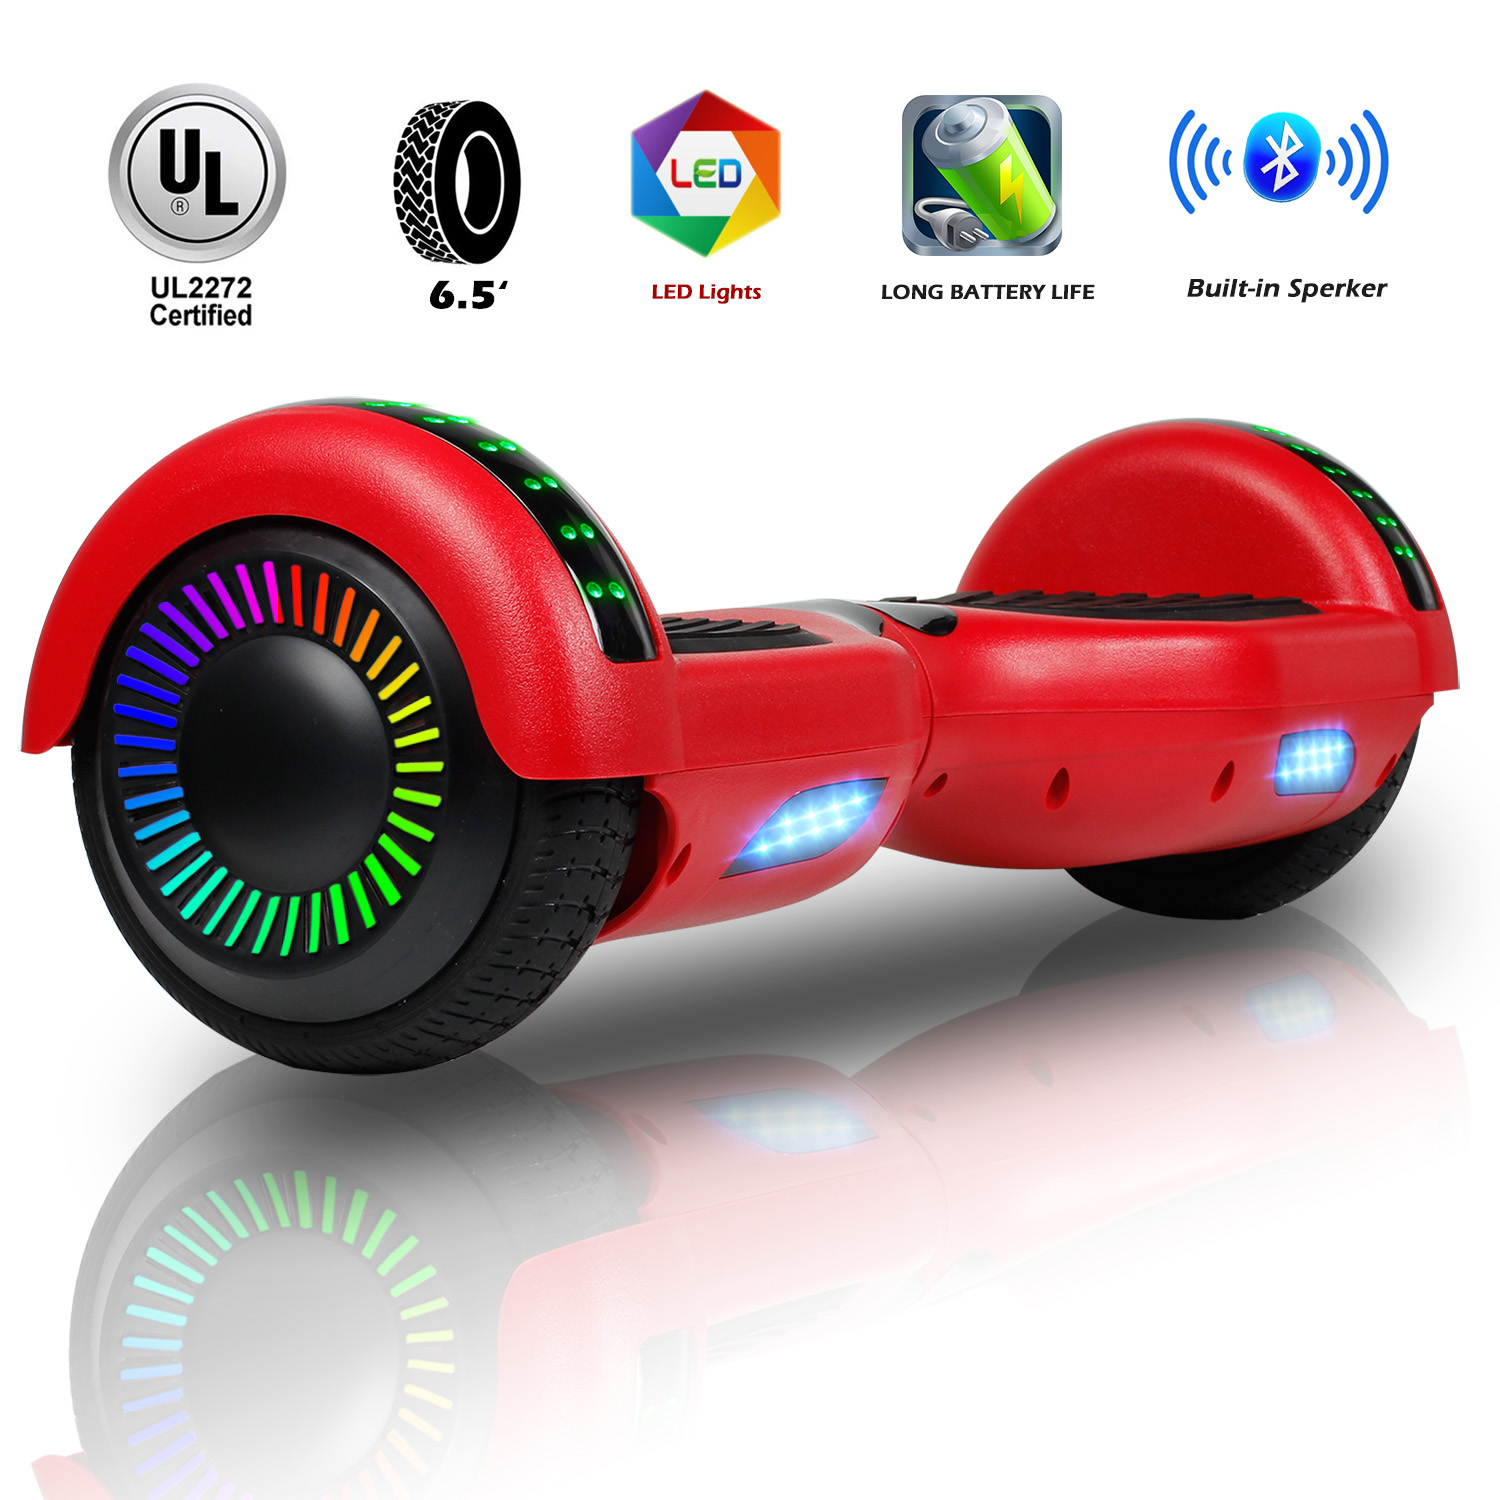 6.5” Red Bluetooth Hoverboard with LED Lights for Girls Se